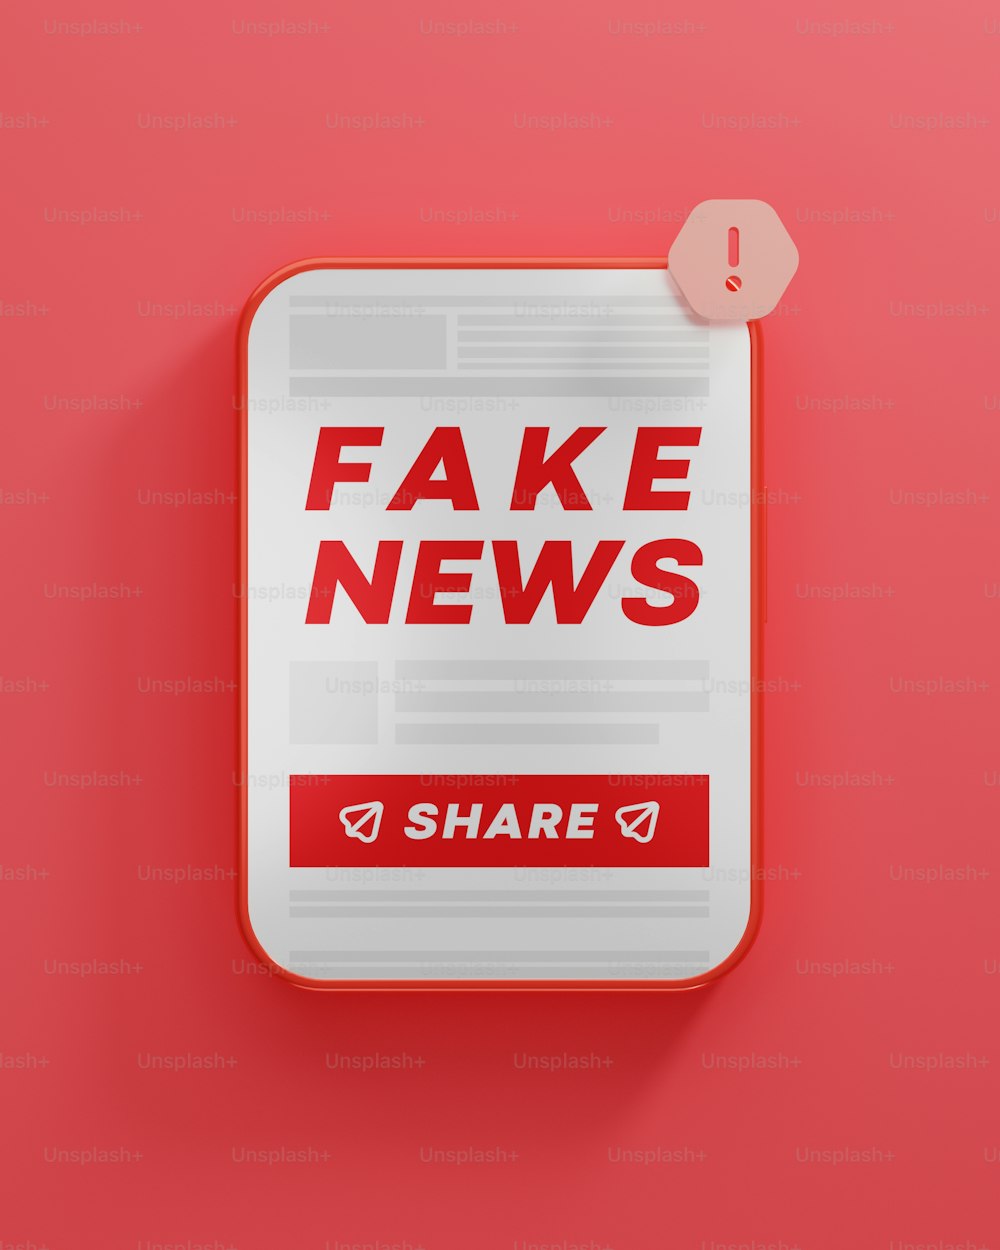 a fake news button on a red background